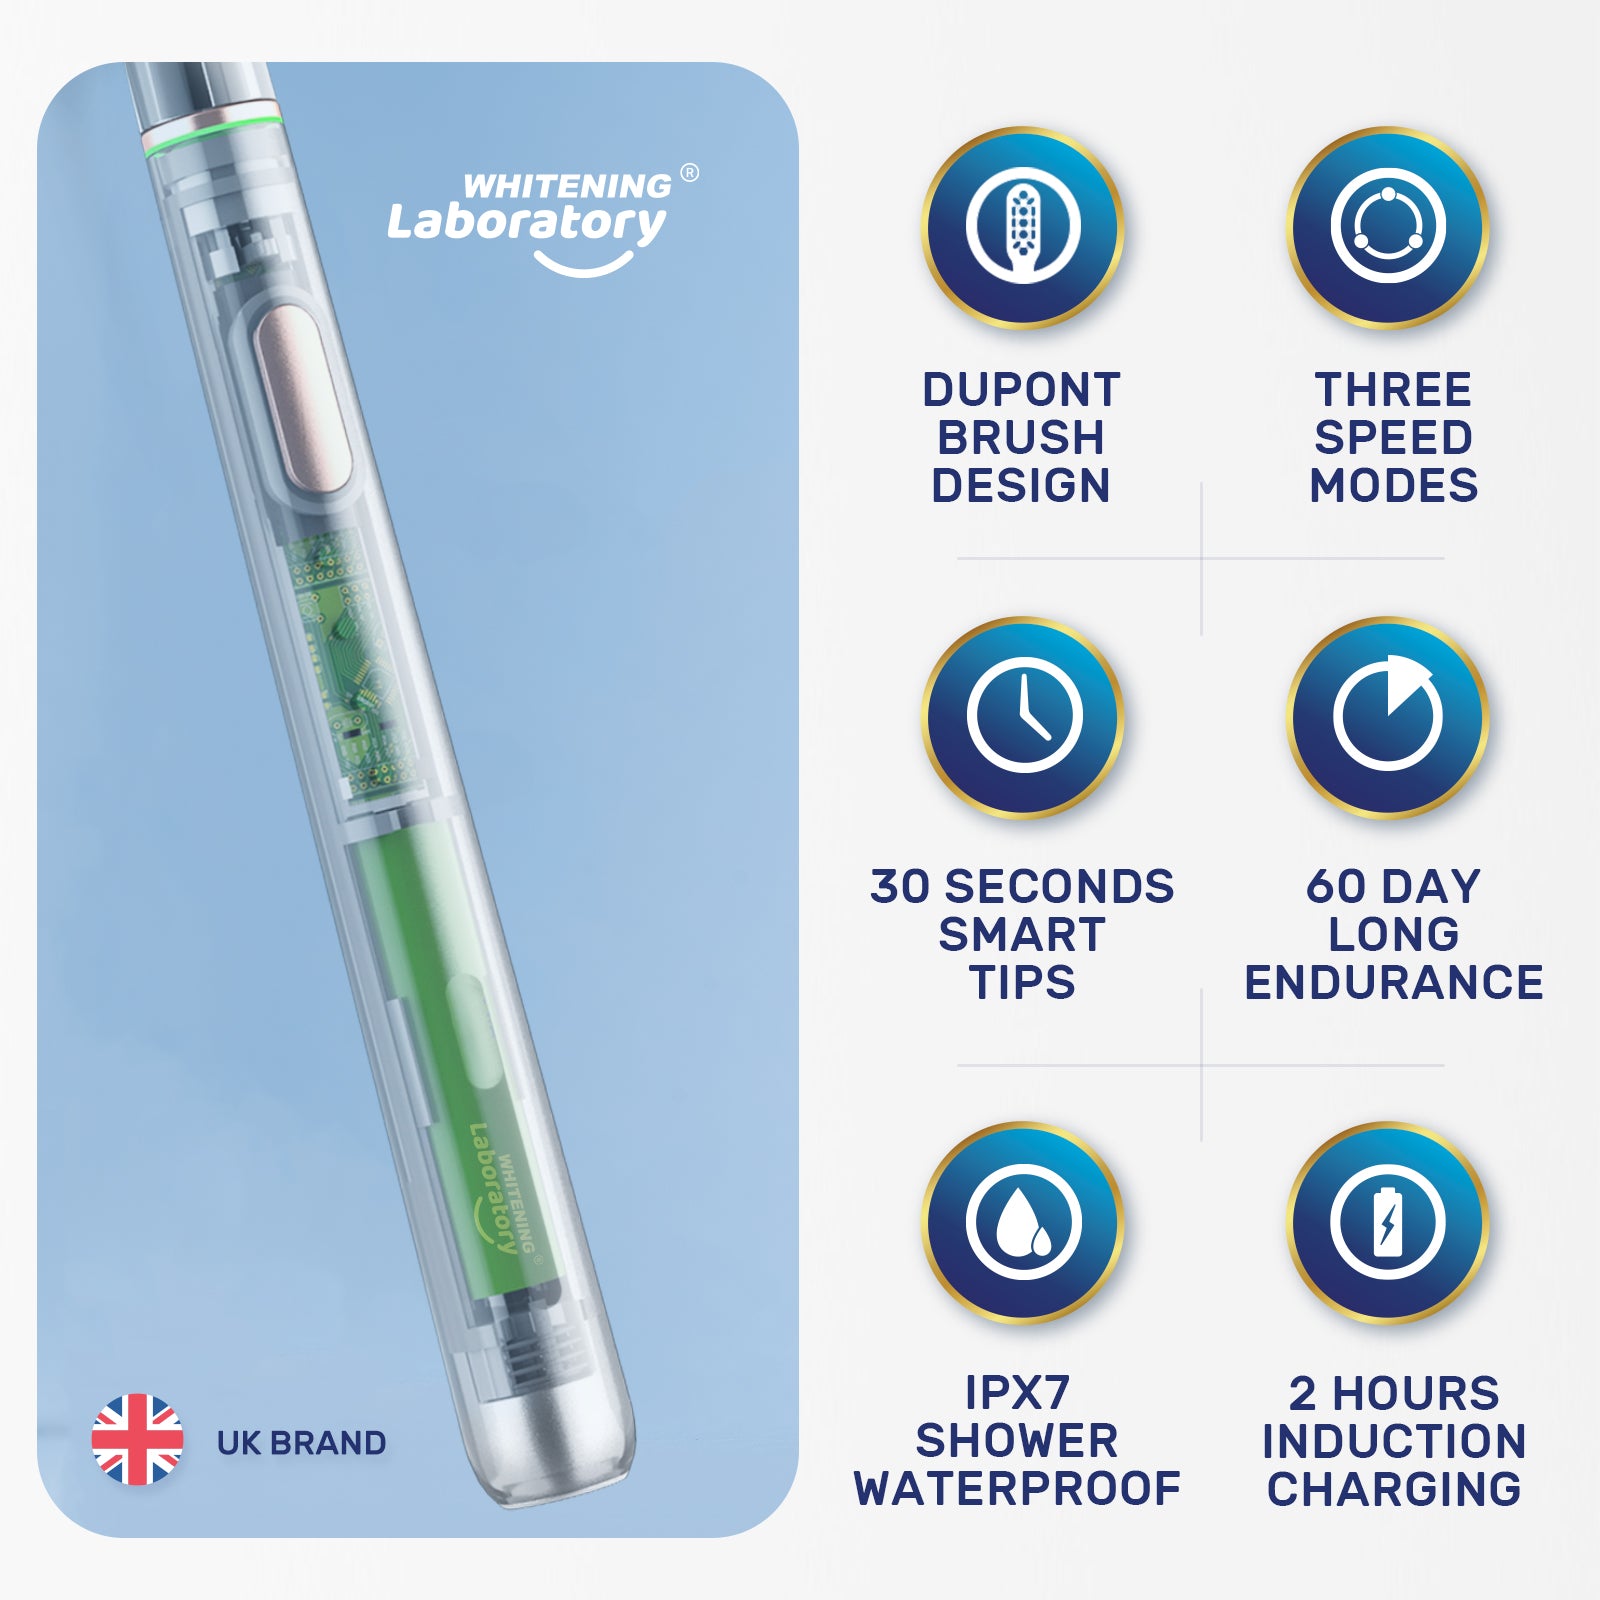 Sleek Whitening Laboratory sonic toothbrush highlighting features such as Dupont brush design, three-speed modes, and IPX7 waterproof rating.